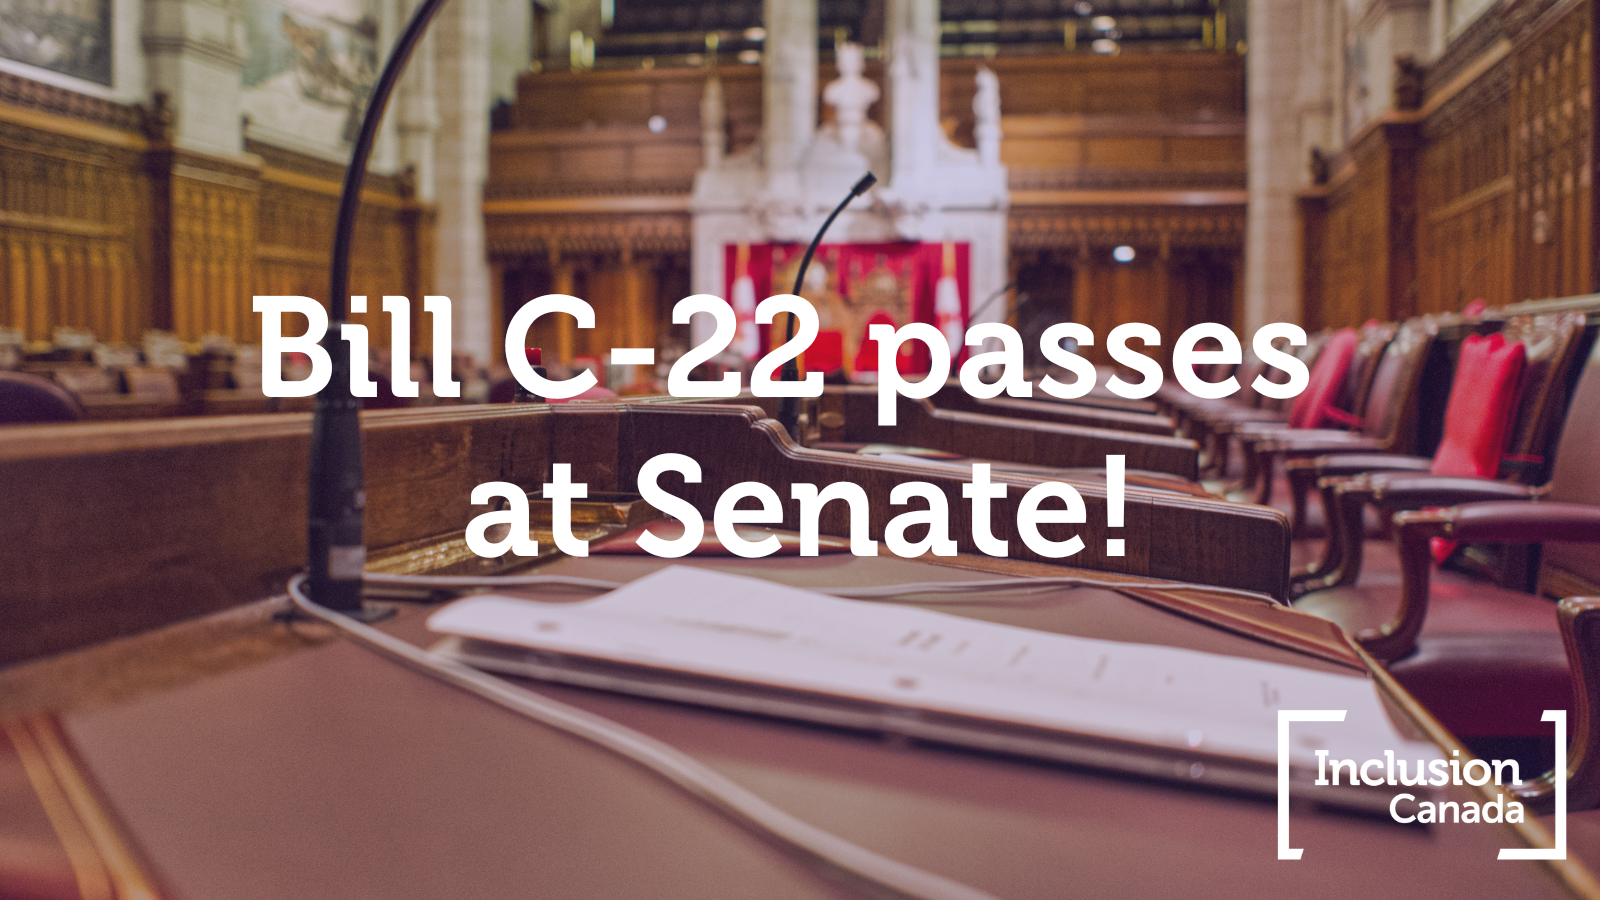 An image of the inside of the senate, over which text that reads "Bill C-22 passes at Senate!"